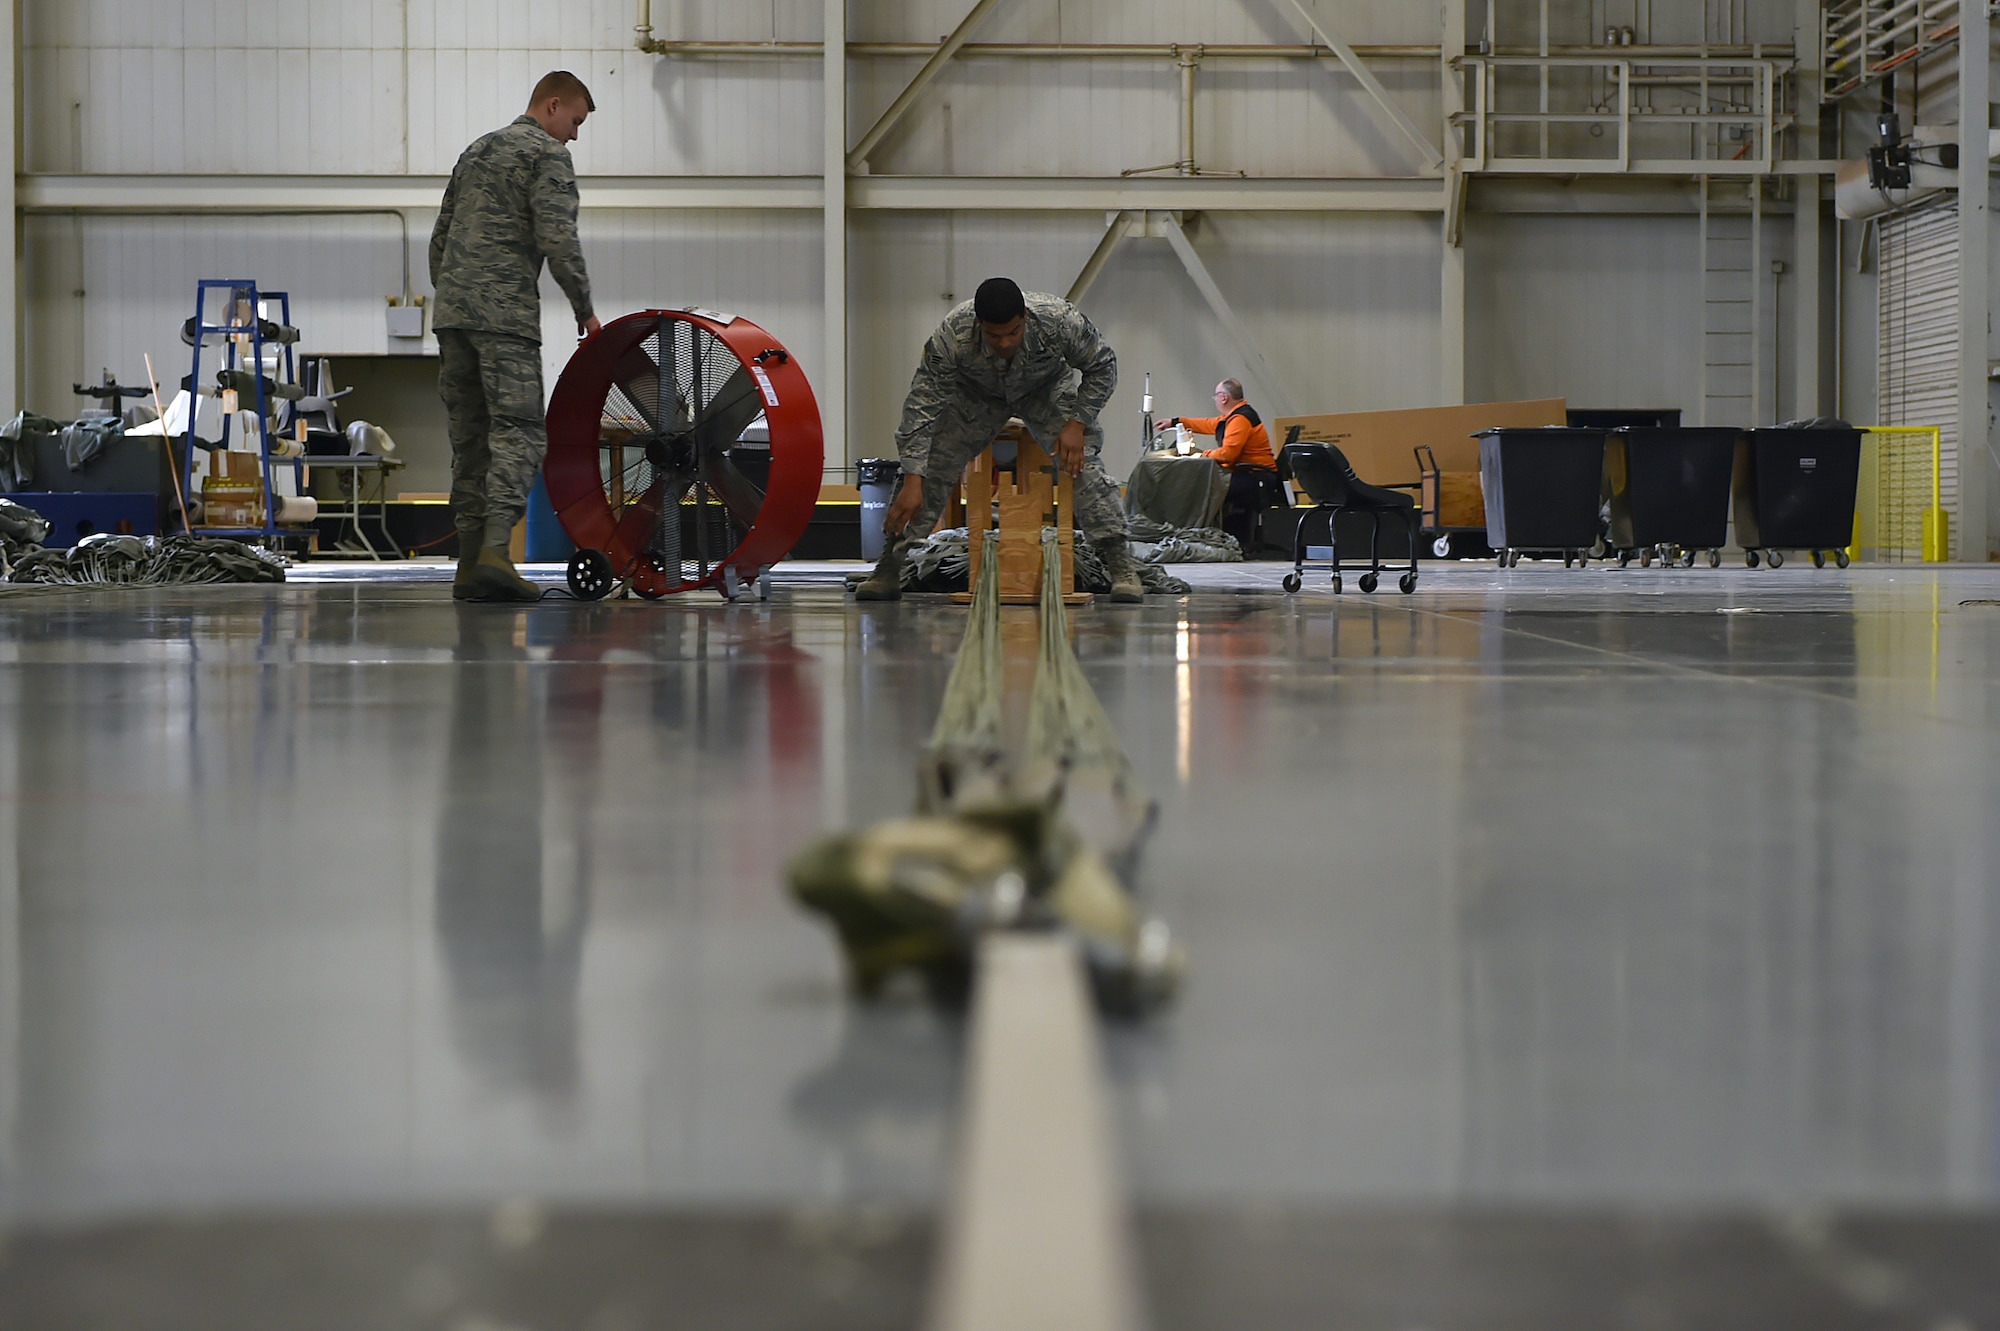 U.S. Air Force Senior Airman Allen Cook, an air freight specialist assigned to the 97th Logistics Readiness Squadron, separates cargo parachute strings to inspect it for damages, Feb. 12, 2018, at Altus Air Force Base, Okla.